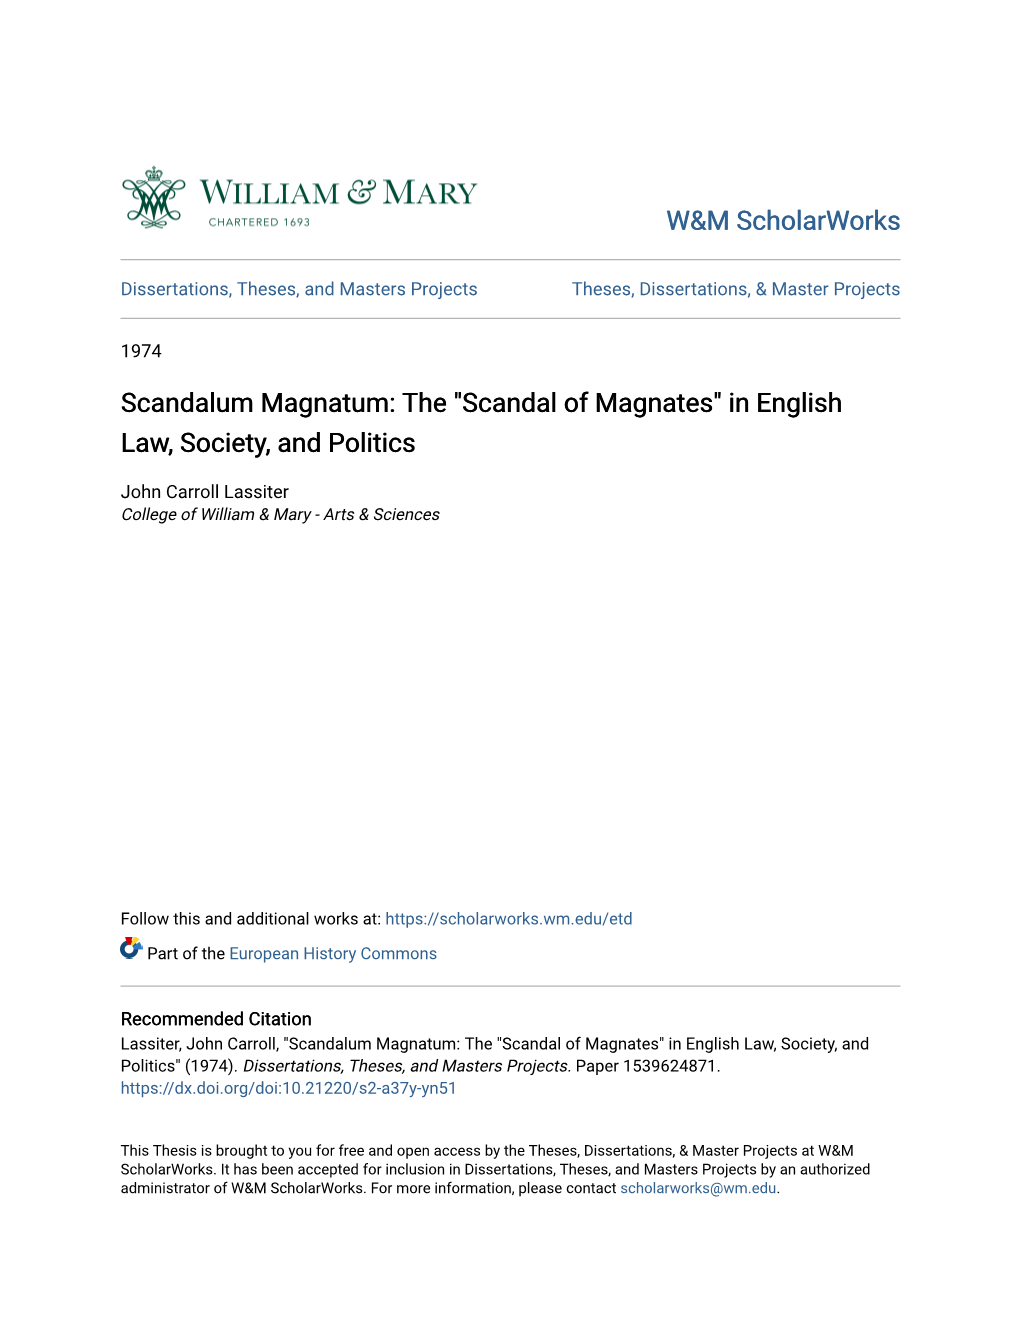 Scandalum Magnatum: the "Scandal of Magnates" in English Law, Society, and Politics